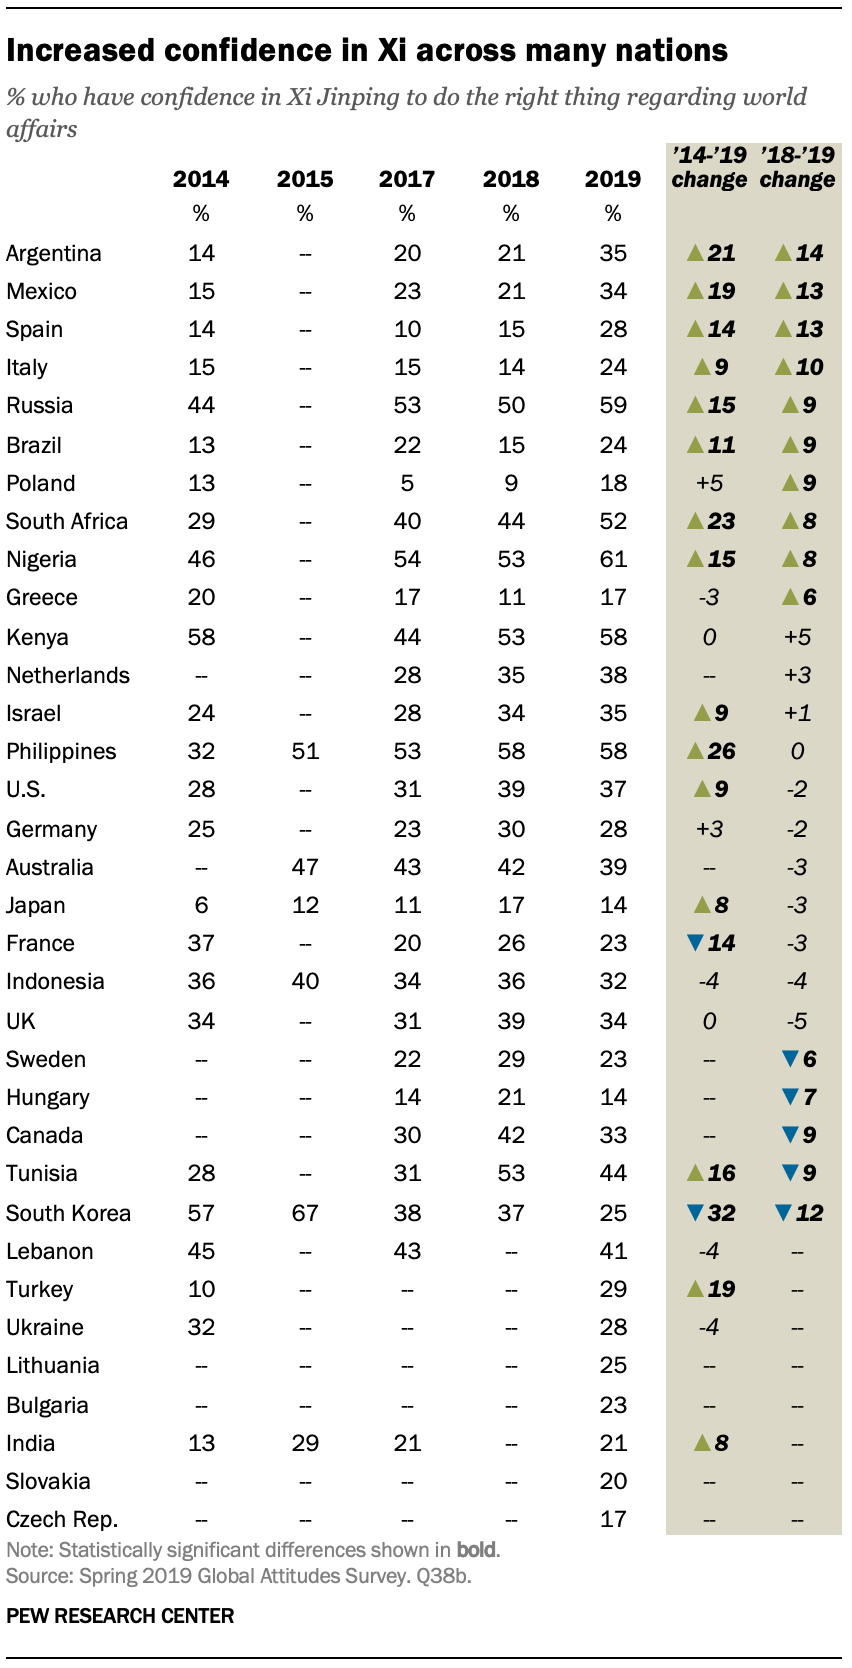 A table showing increased confidence in Xi across many nations